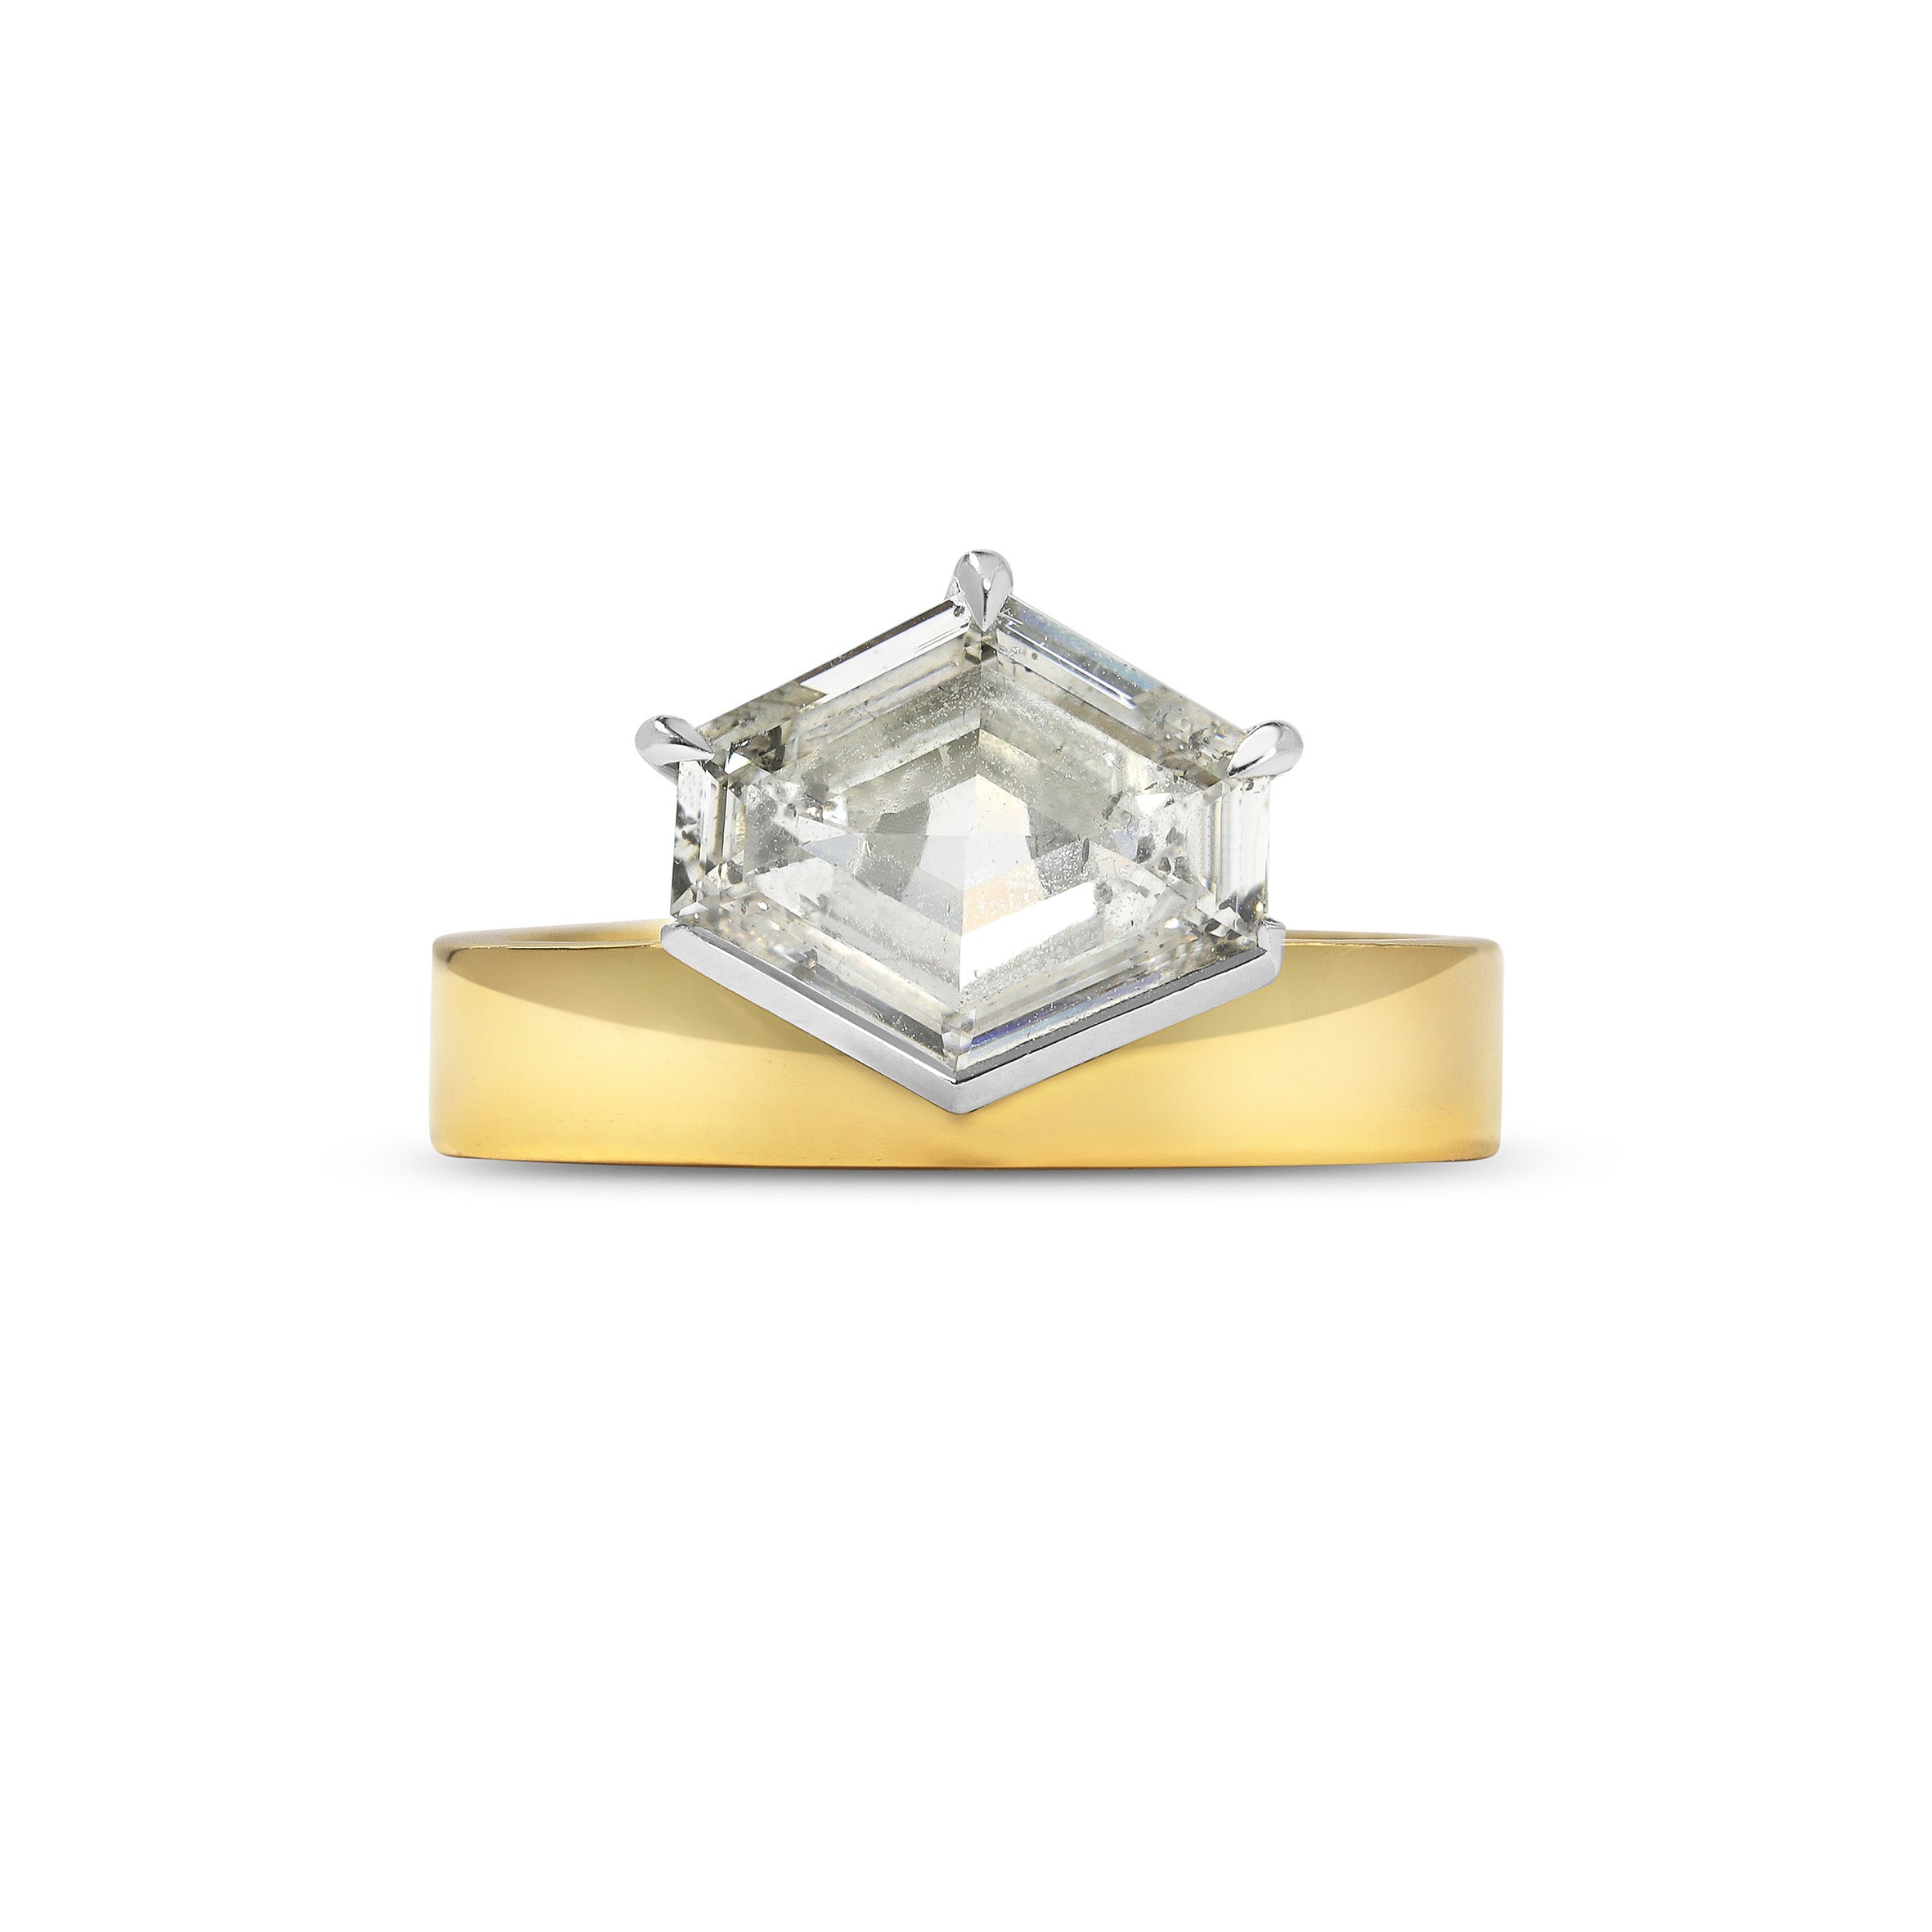 The Aelia Ring by East London jeweller Rachel Boston | Discover our collections of unique and timeless engagement rings, wedding rings, and modern fine jewellery.